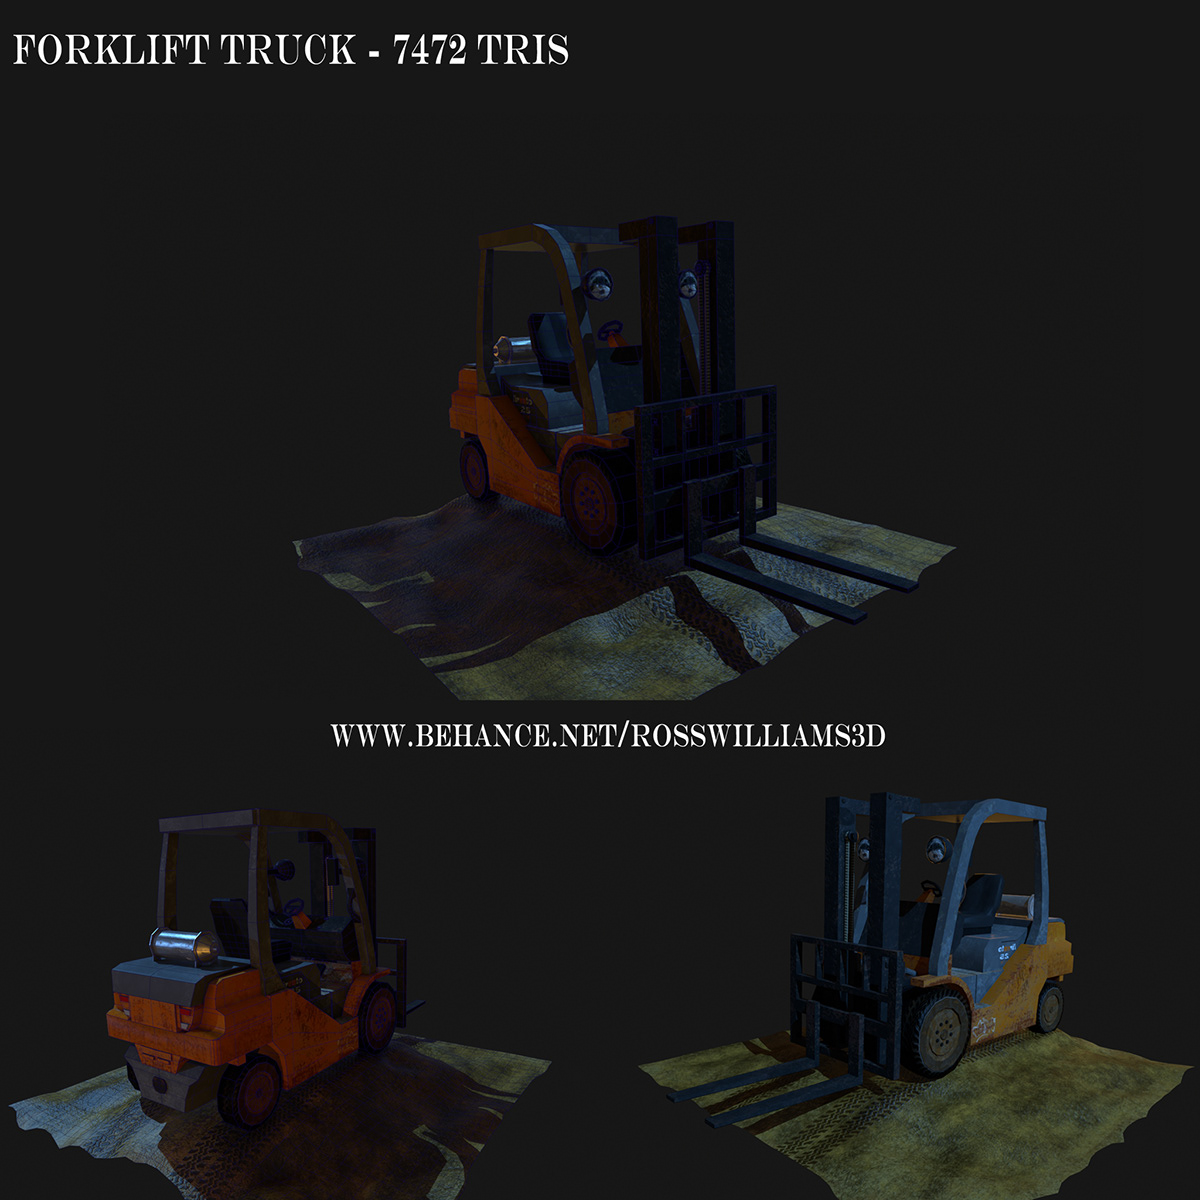 art 3D gameart Games lowpoly Maya Vehicle Forklift Truck marmoset toolbag Render photoshop nDo2